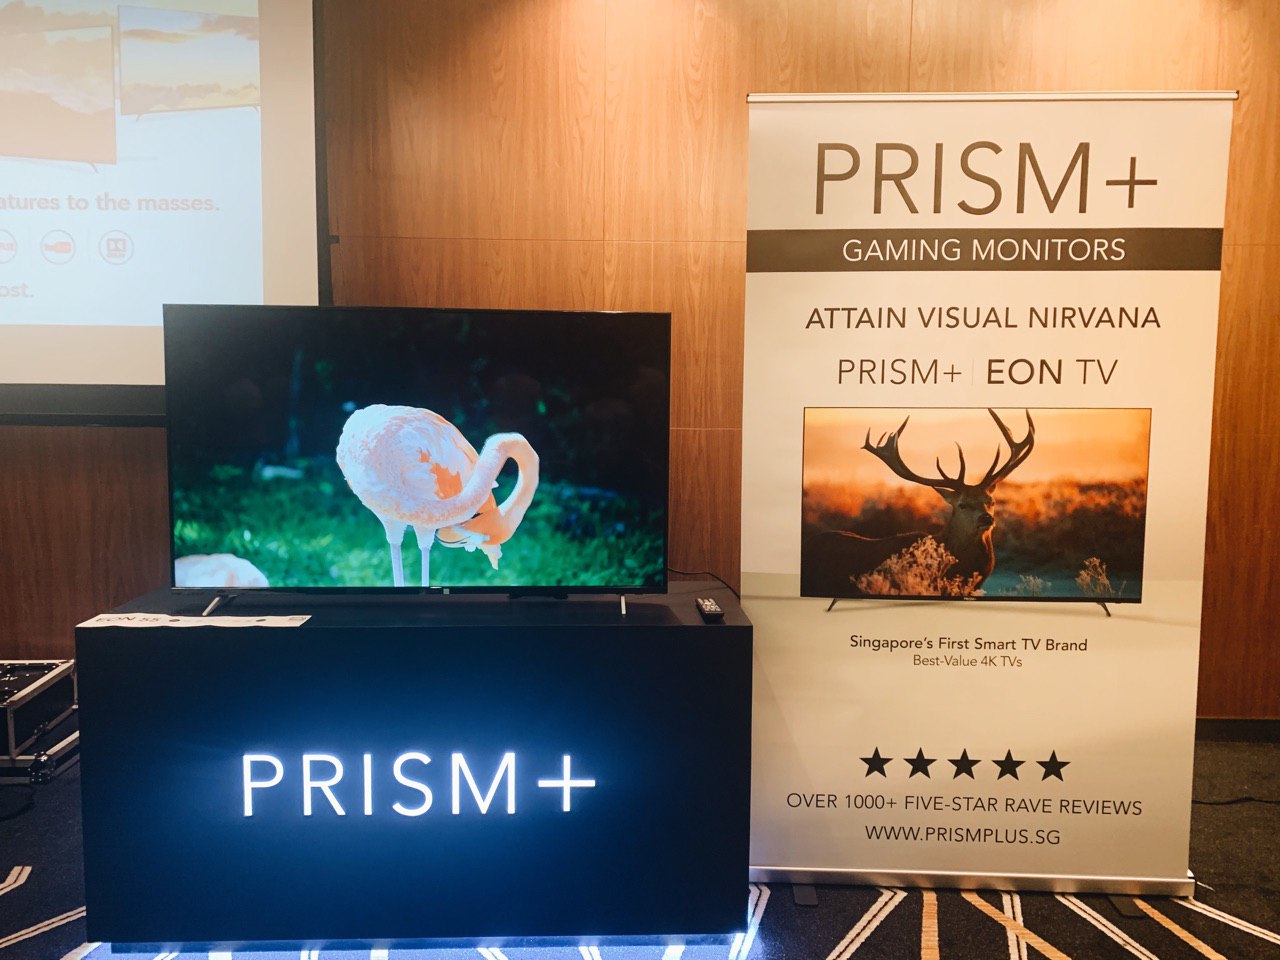 Singapore's PRISM+ Launches First-Ever Affordable 4K Smart TV Line